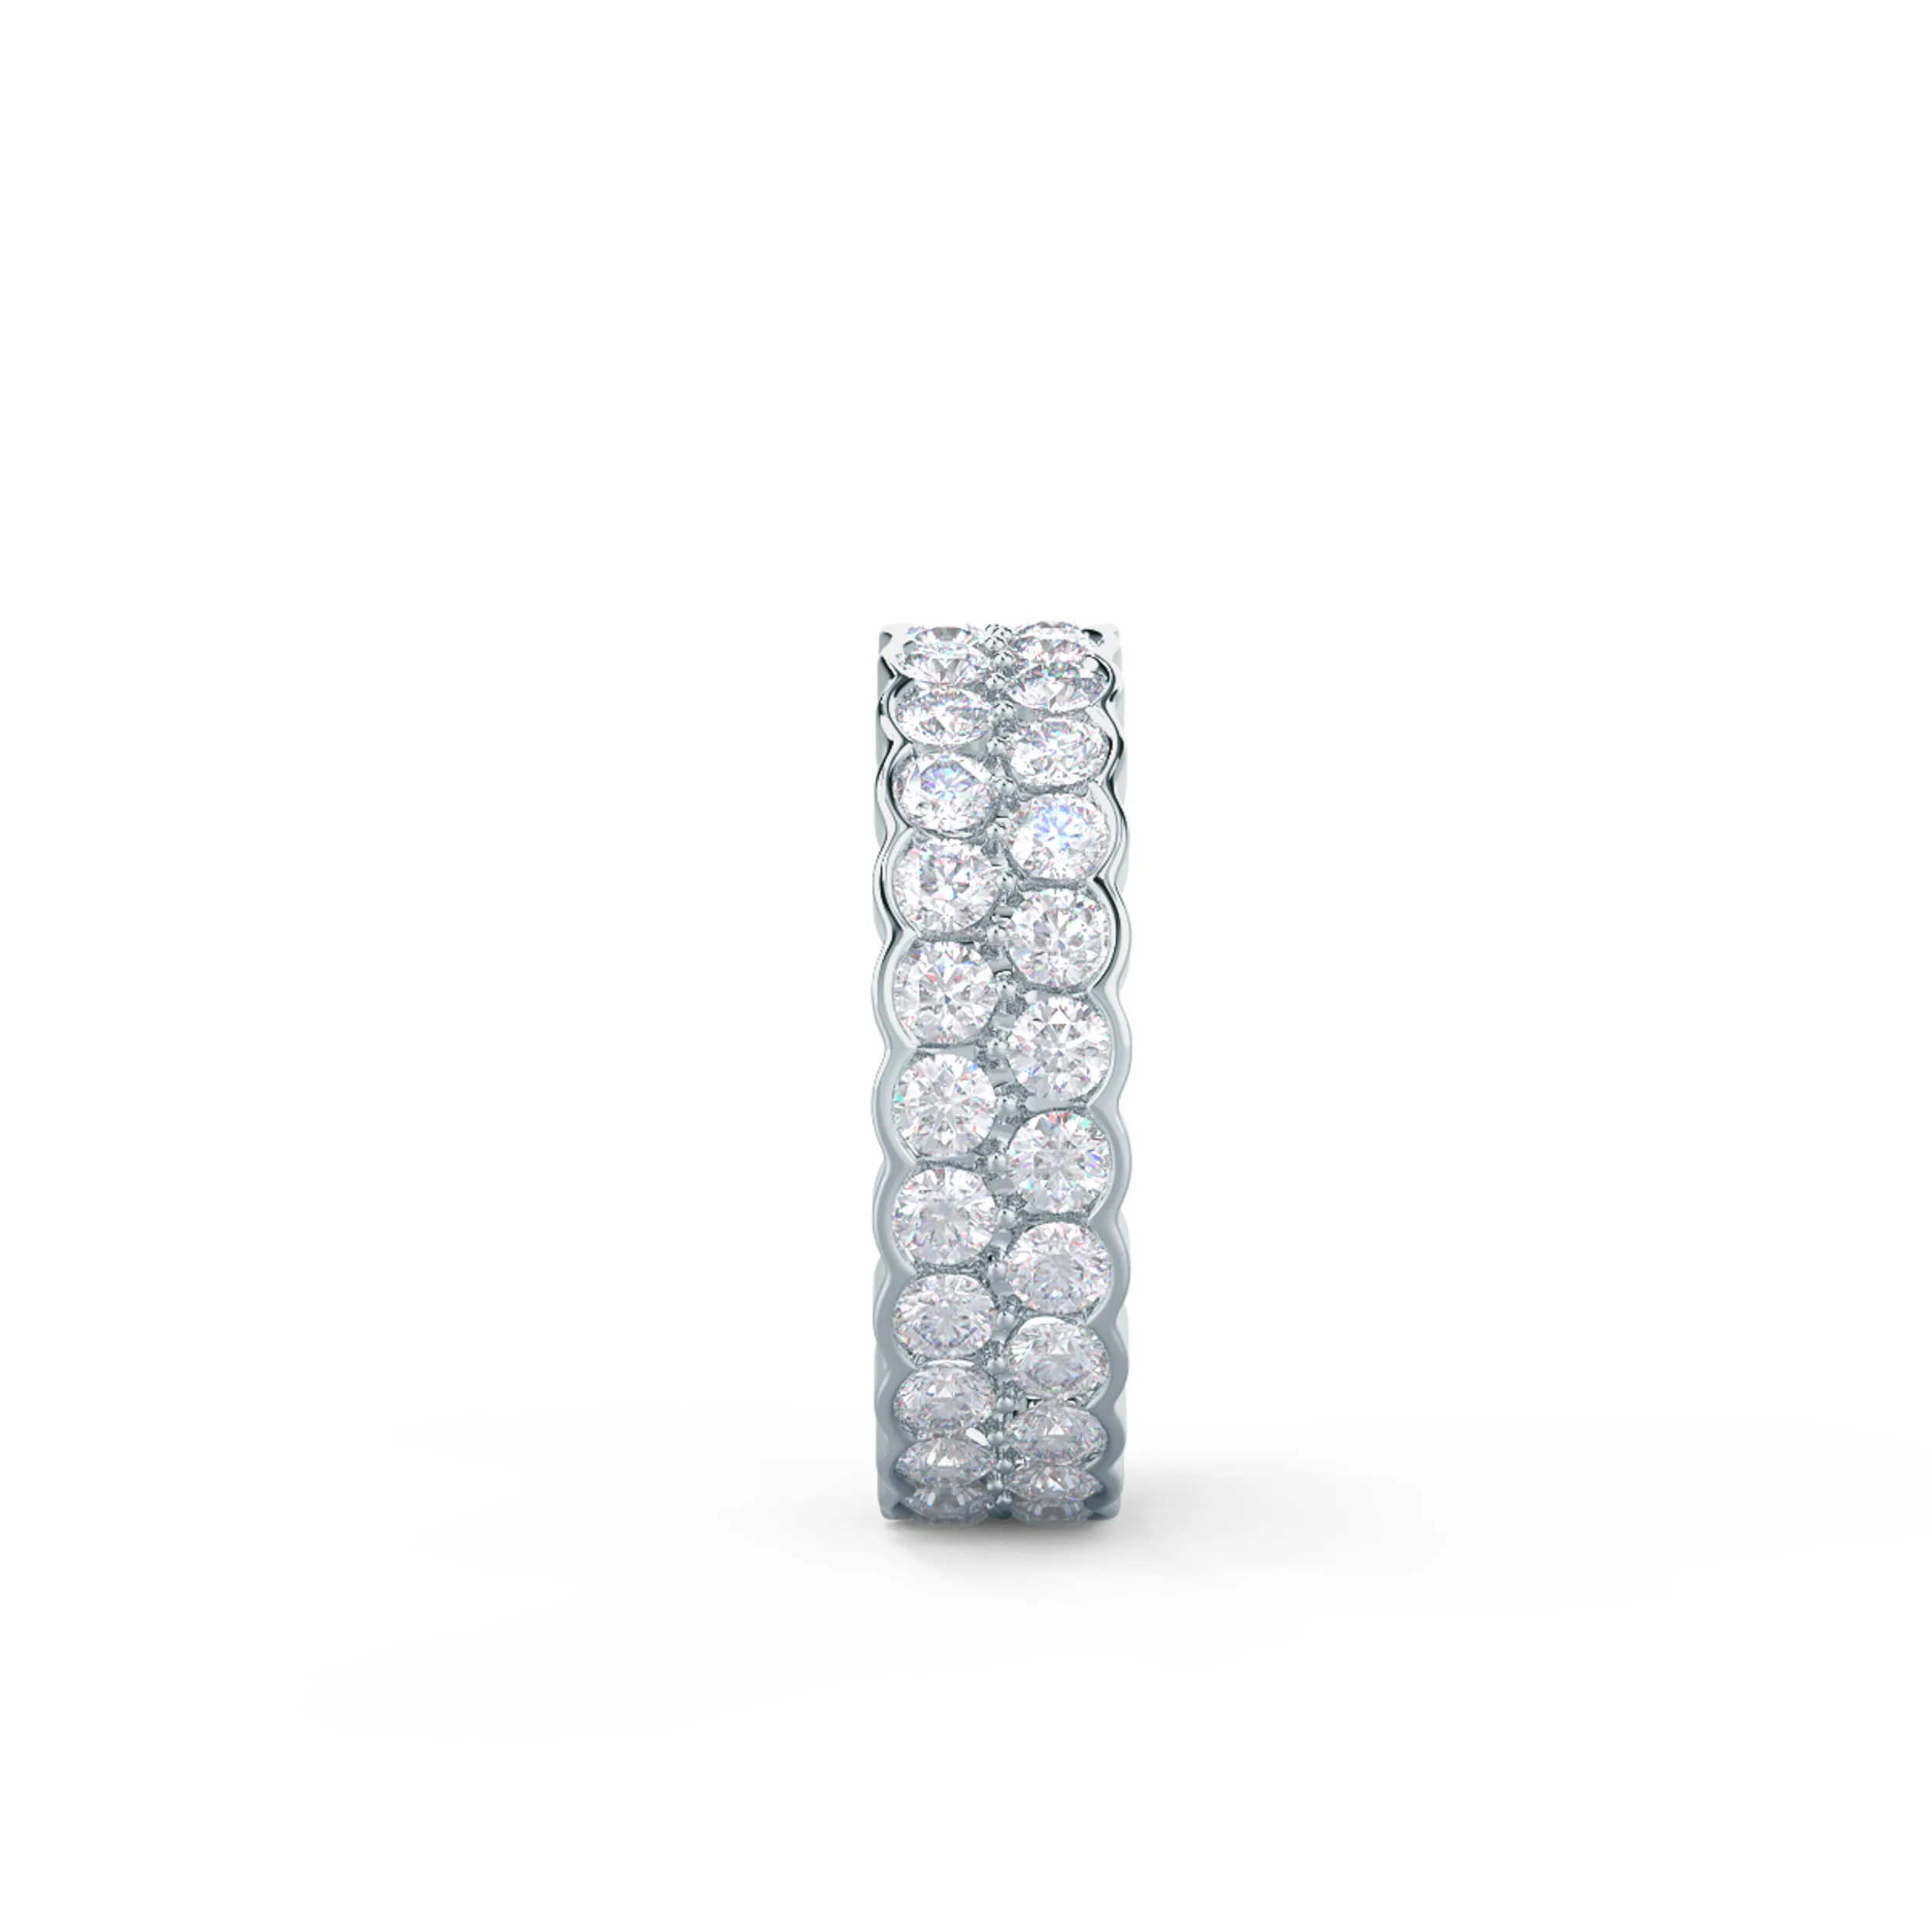 Hand Selected 2.0 Carat Round Synthetic Diamonds set in 18 Karat White Gold Two Row Bezel Eternity Band (Side View)